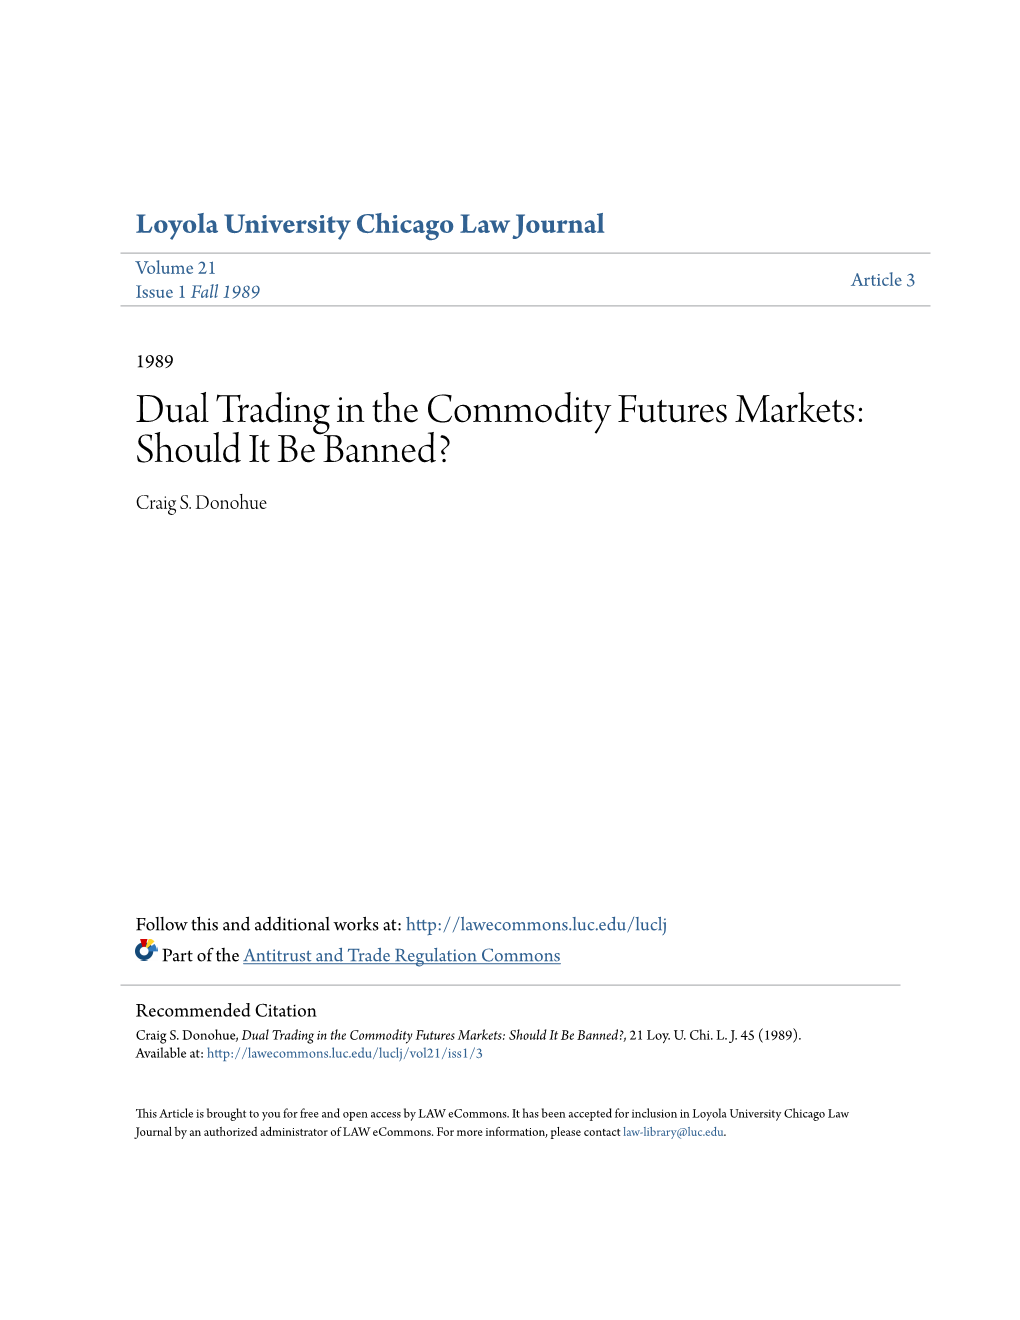 Dual Trading in the Commodity Futures Markets: Should It Be Banned? Craig S